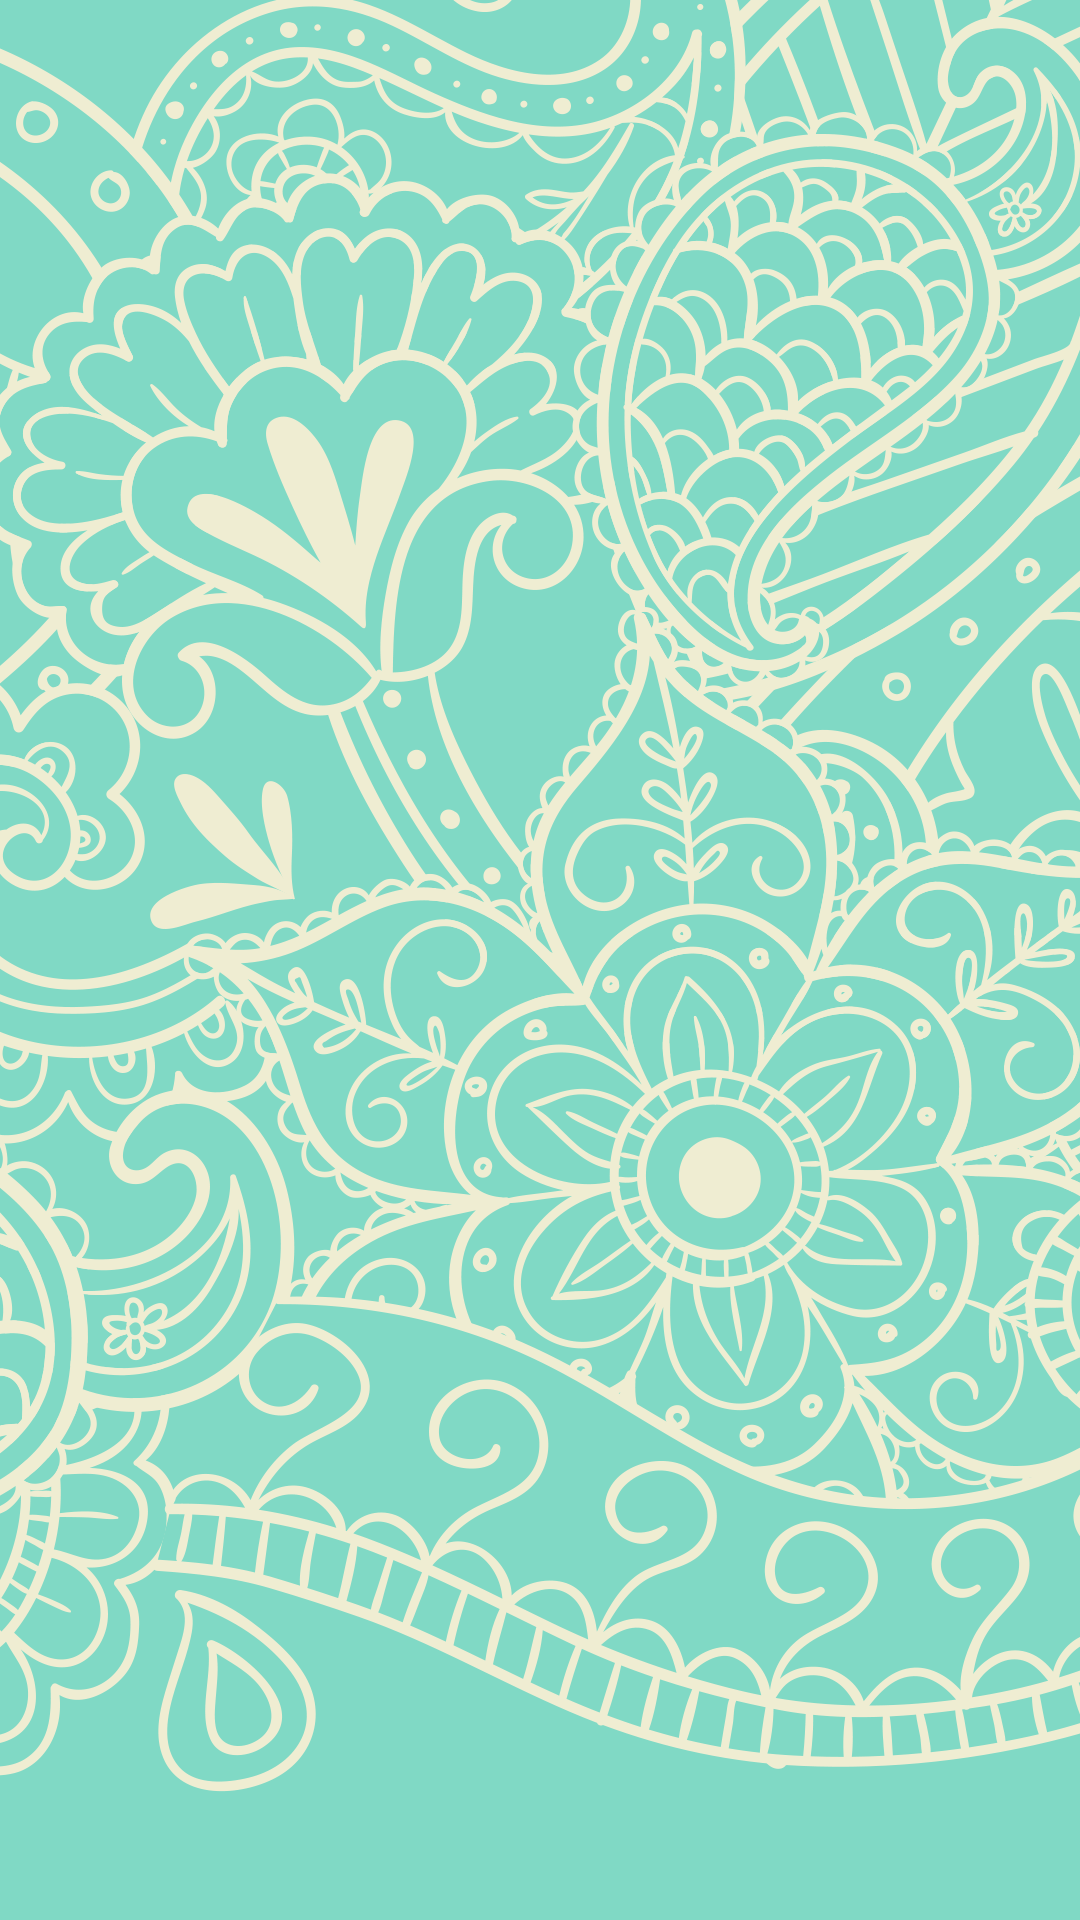 Free HD Nature Paisley iPhone Wallpaper For Download .0184